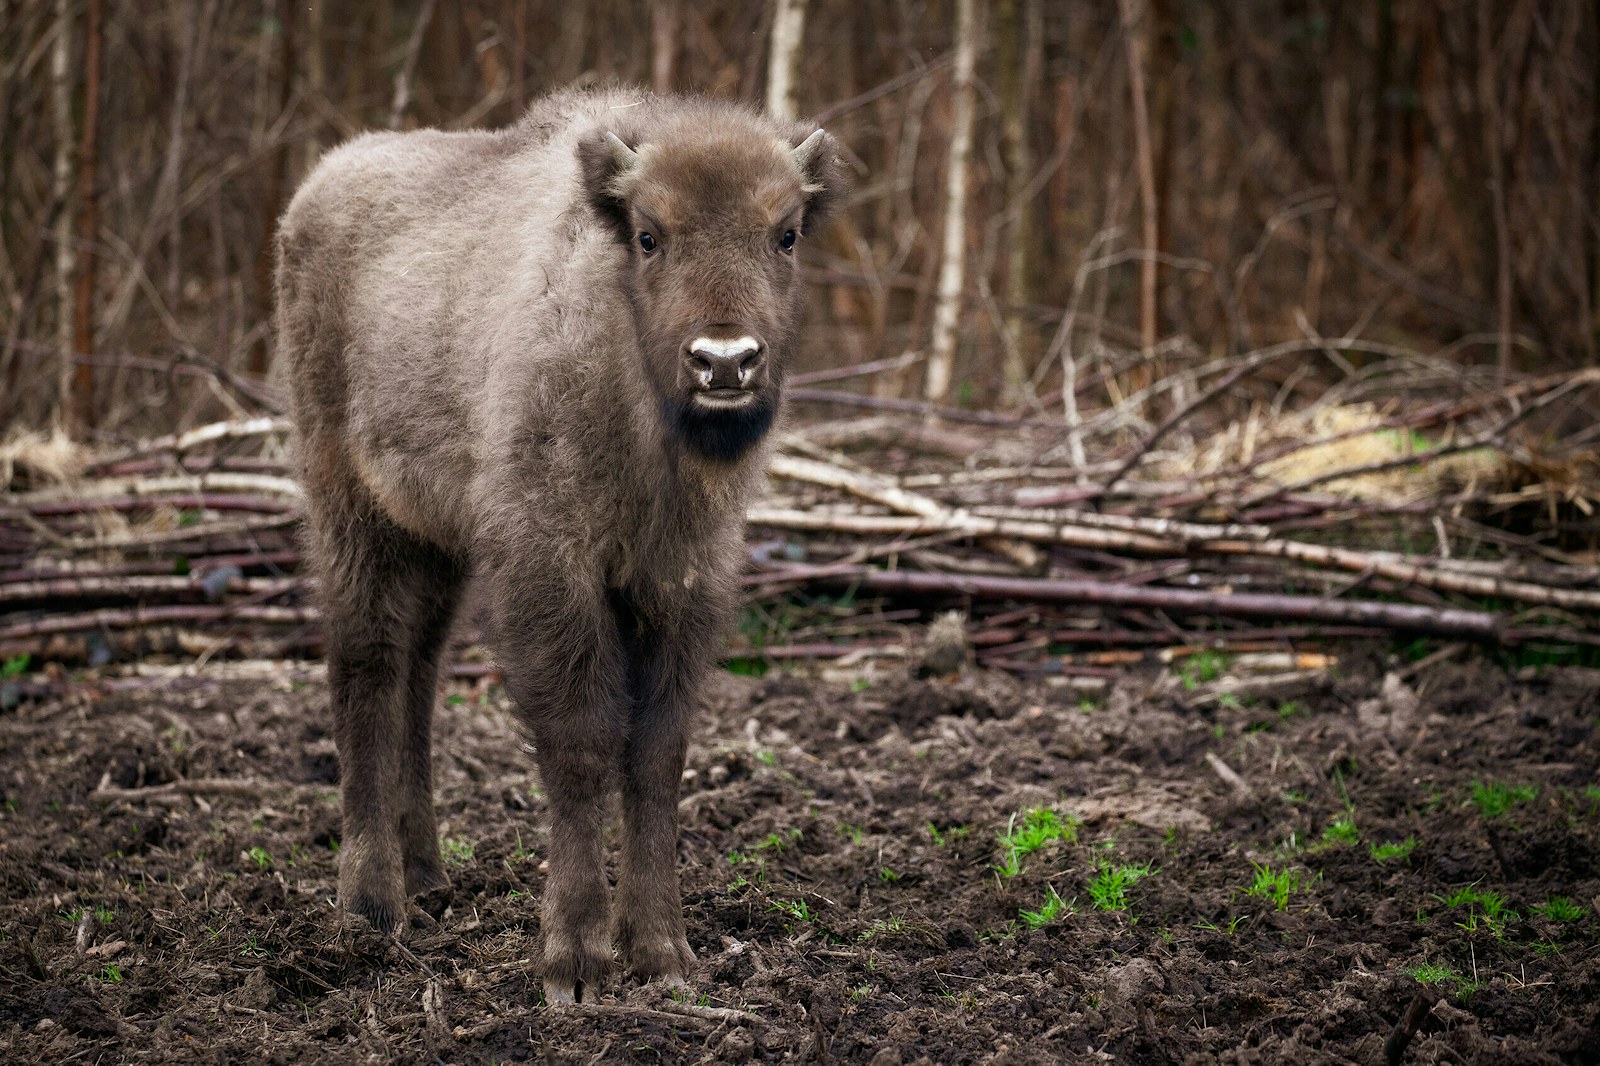 A bison calf stands and looks head on at the camera, the woodland of the Blean is seen behind